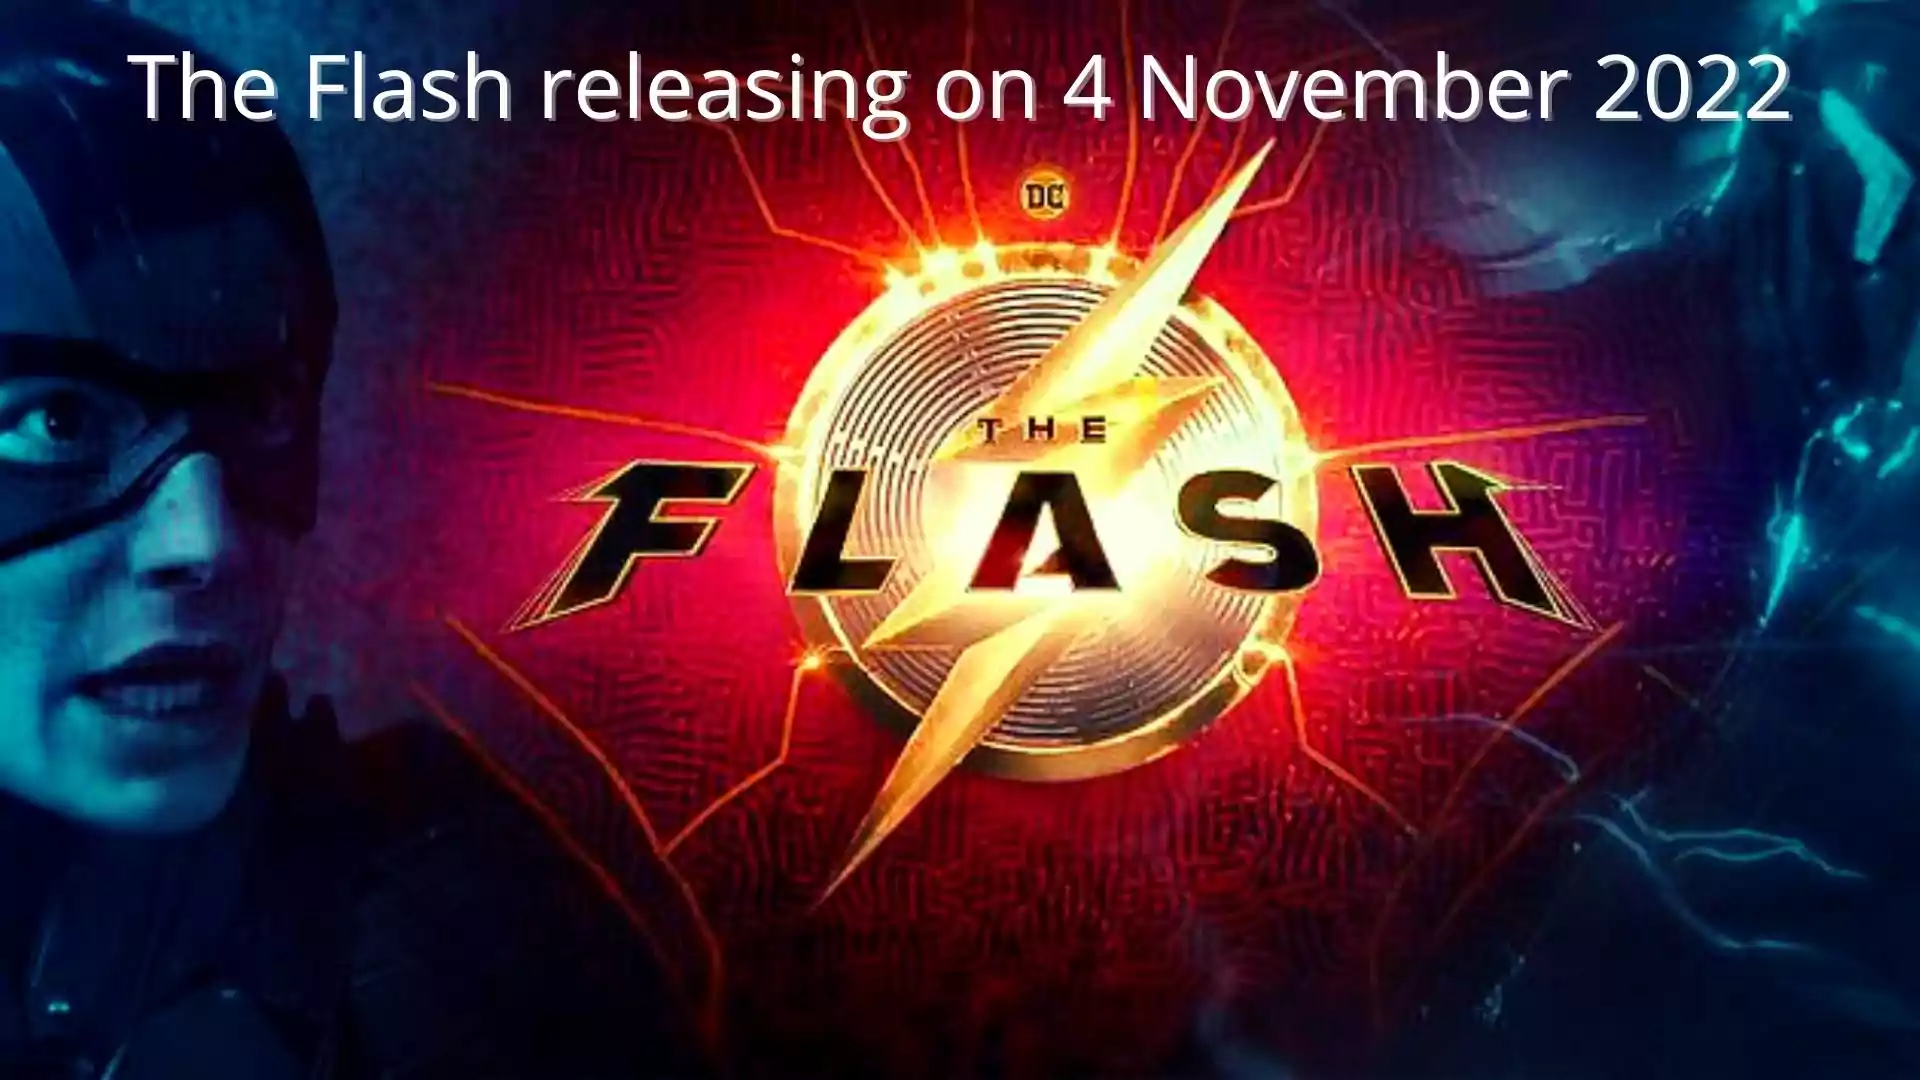 The Flash Movie Release Date, Star Cast, Director, and Producer